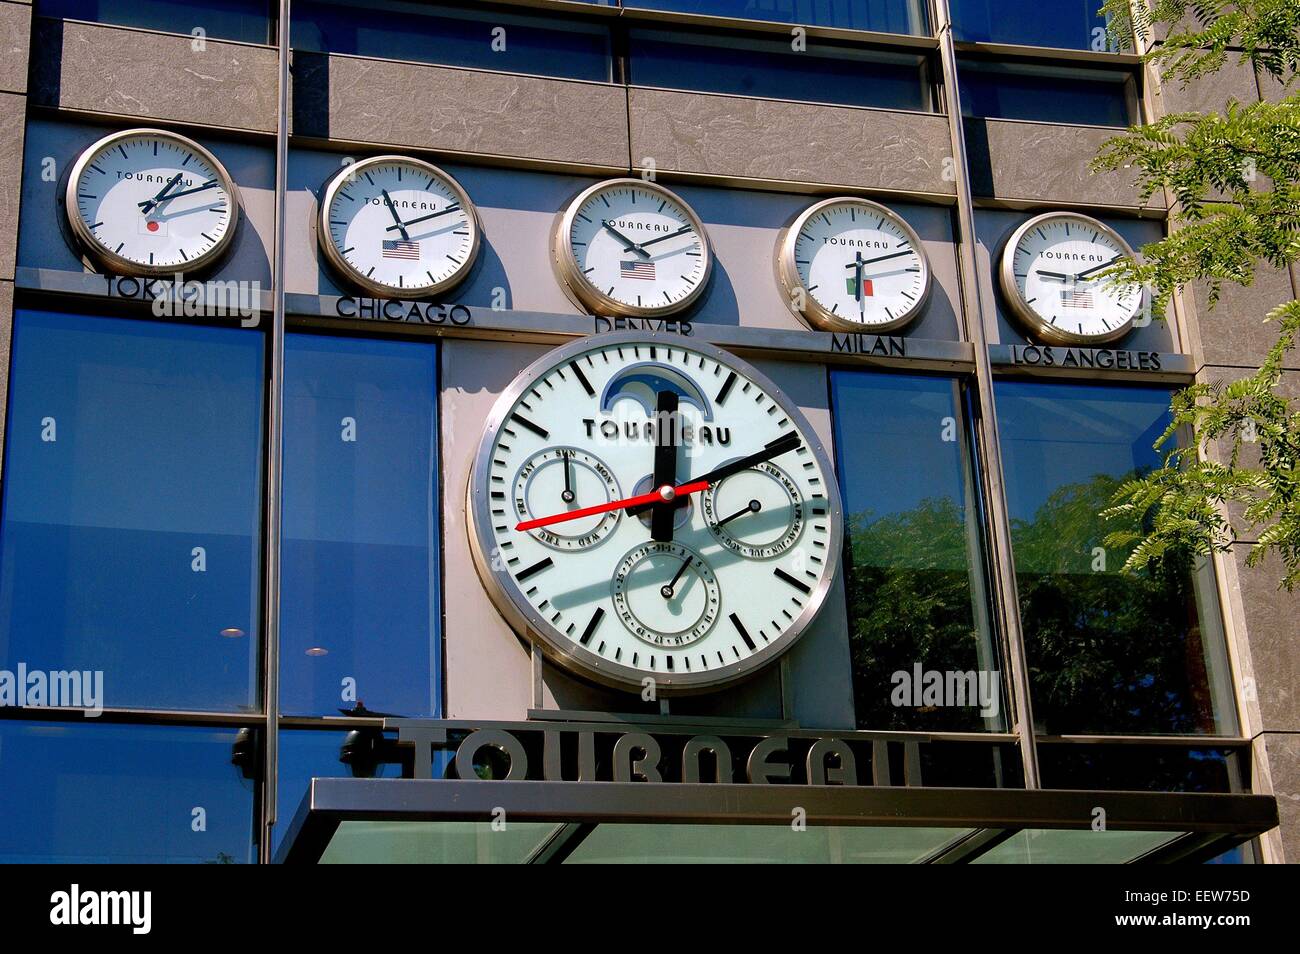 New York City:  Tourneau clocks give the time in various world cities on the exterior of their shop at Time Warner Center Stock Photo